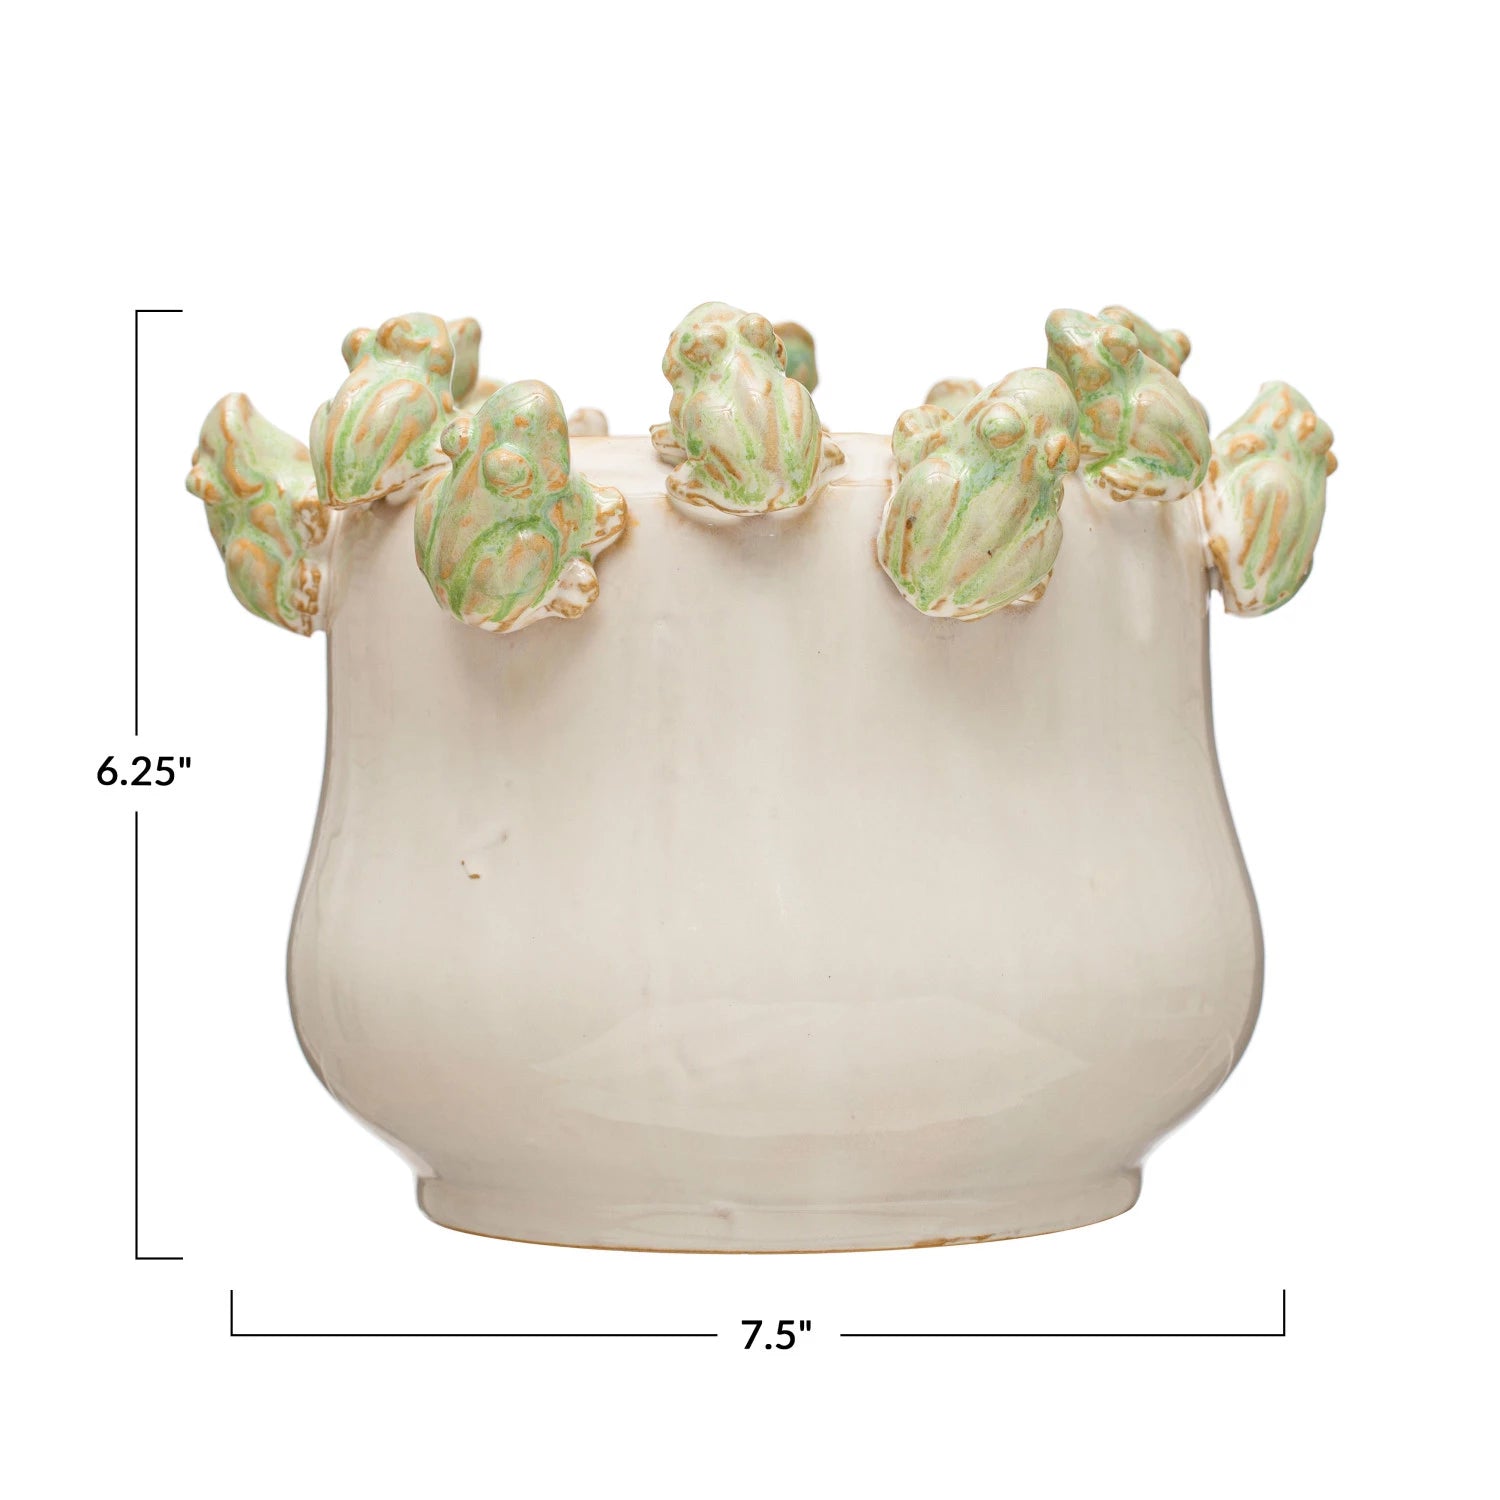 Stoneware Planter with Frogs on Rim